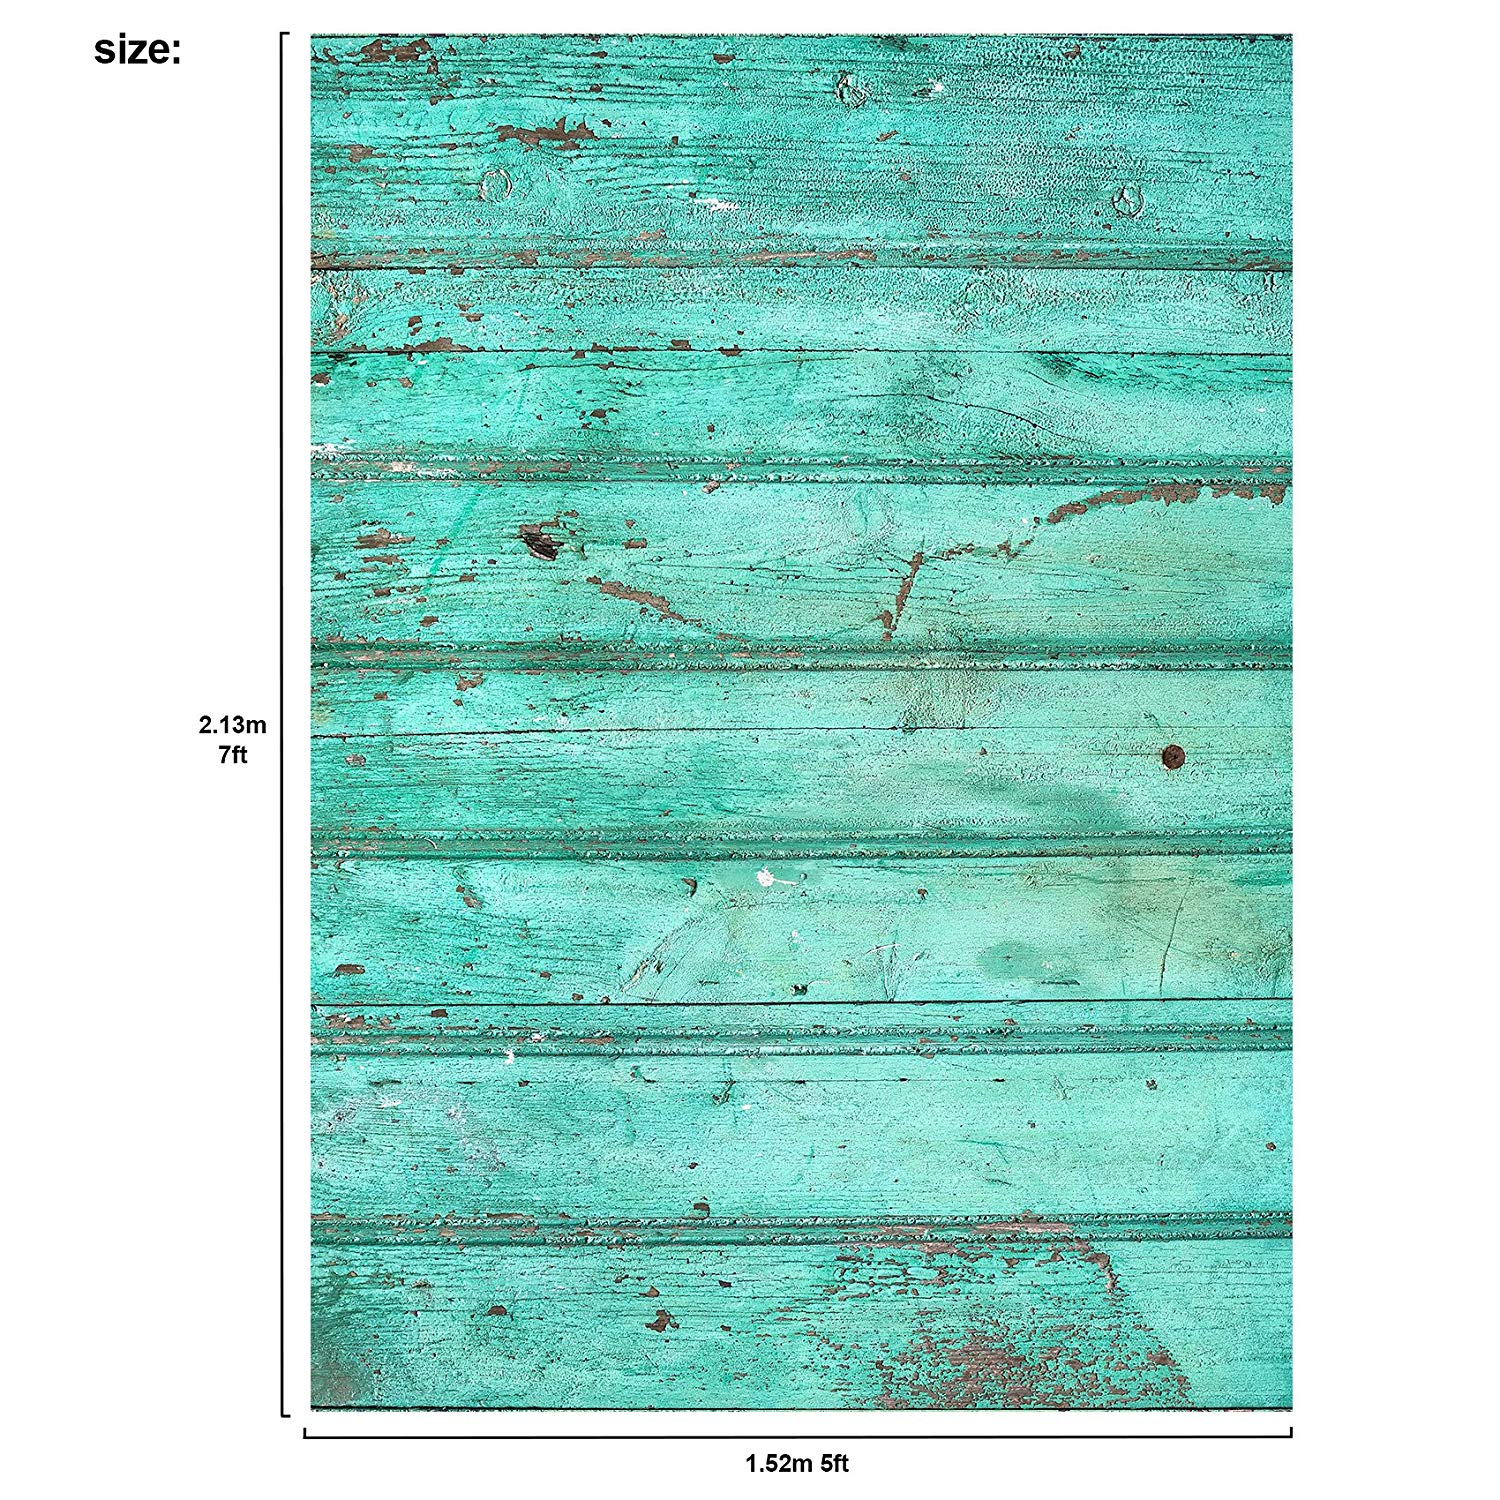 Rustic Distressed Wood Backdrop Photography Background #1794 Emerald